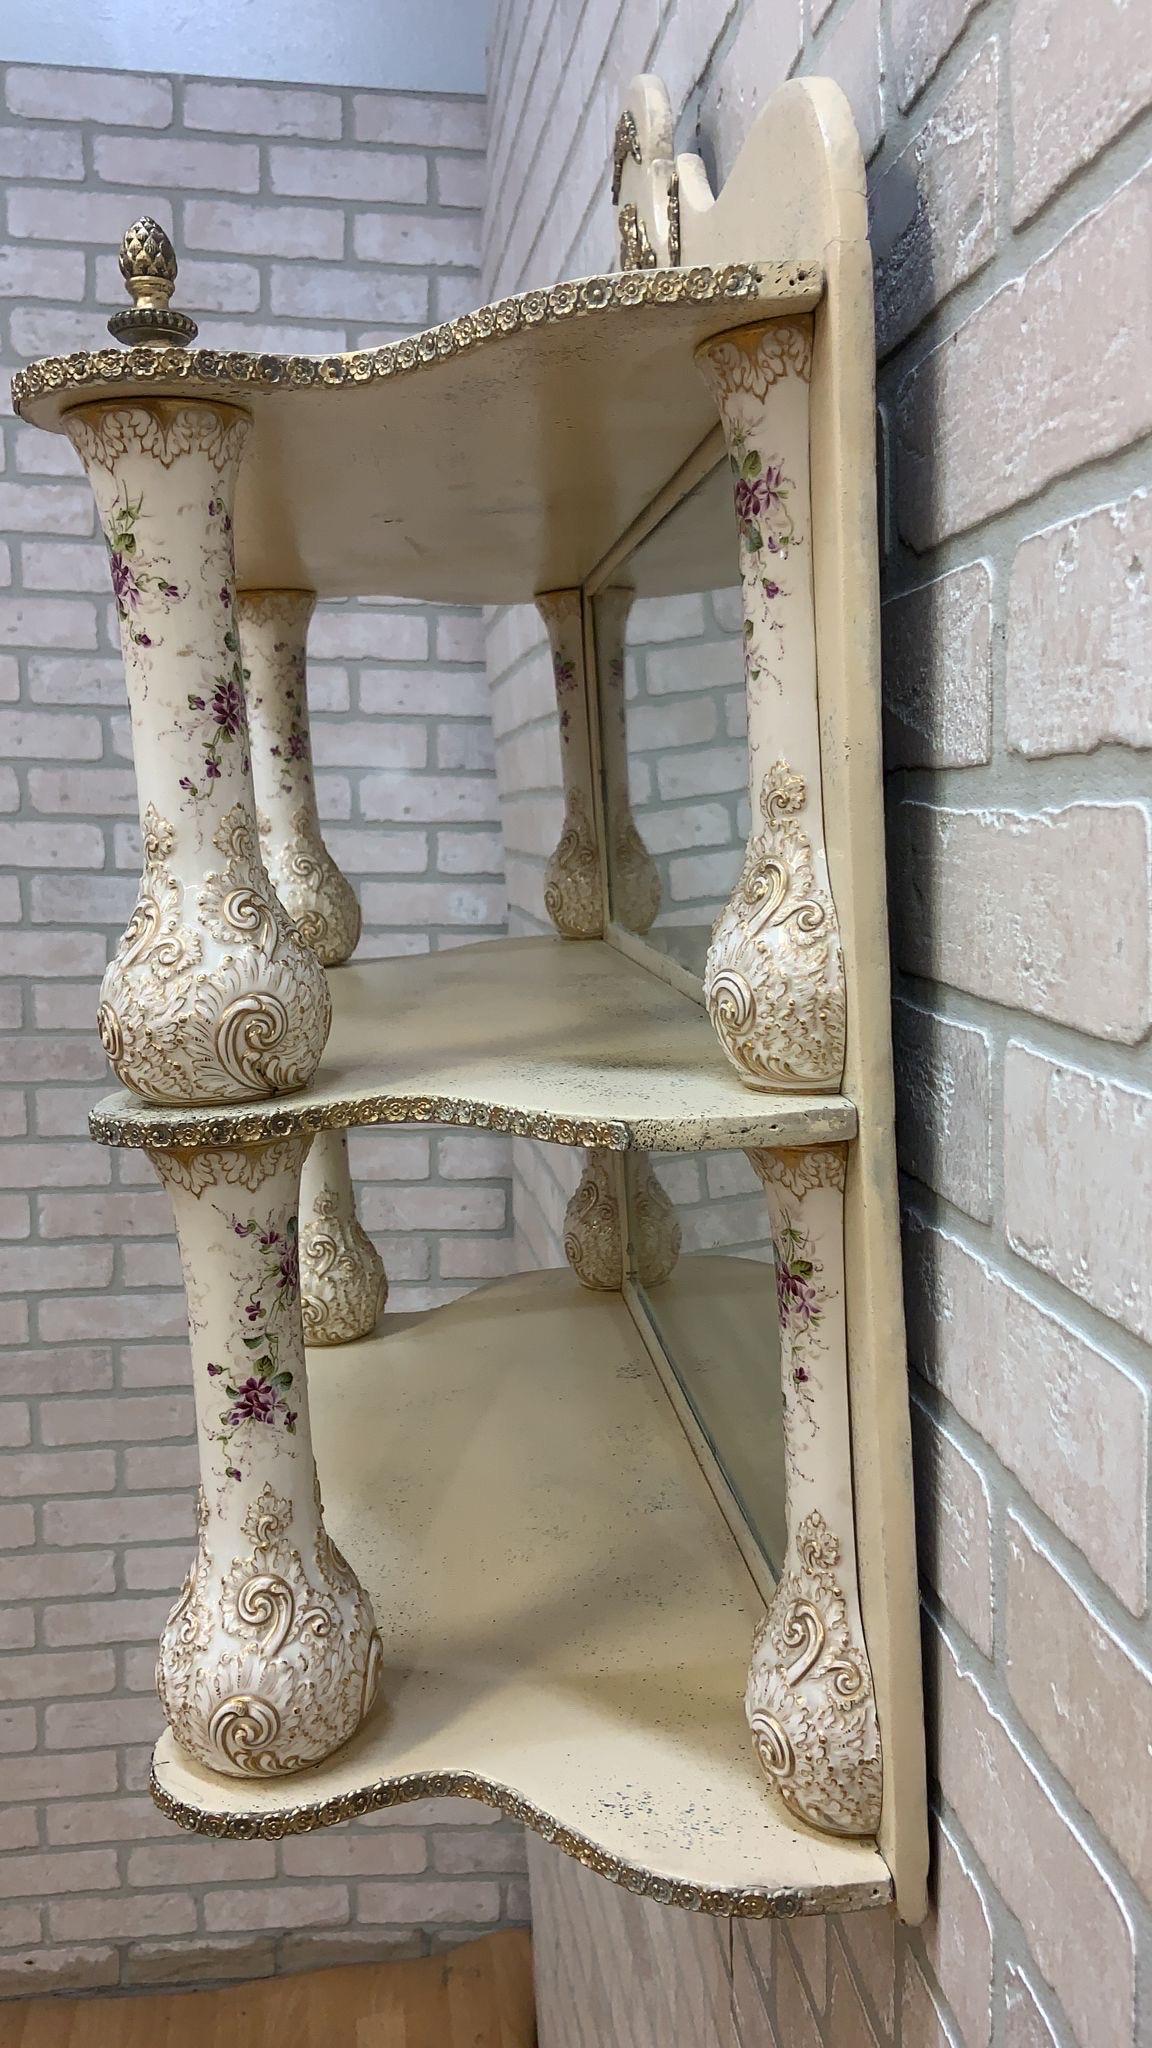 20th Century Antique French Porcelain Columned Brass Mounted Wall Shelf with/Mirror Back For Sale